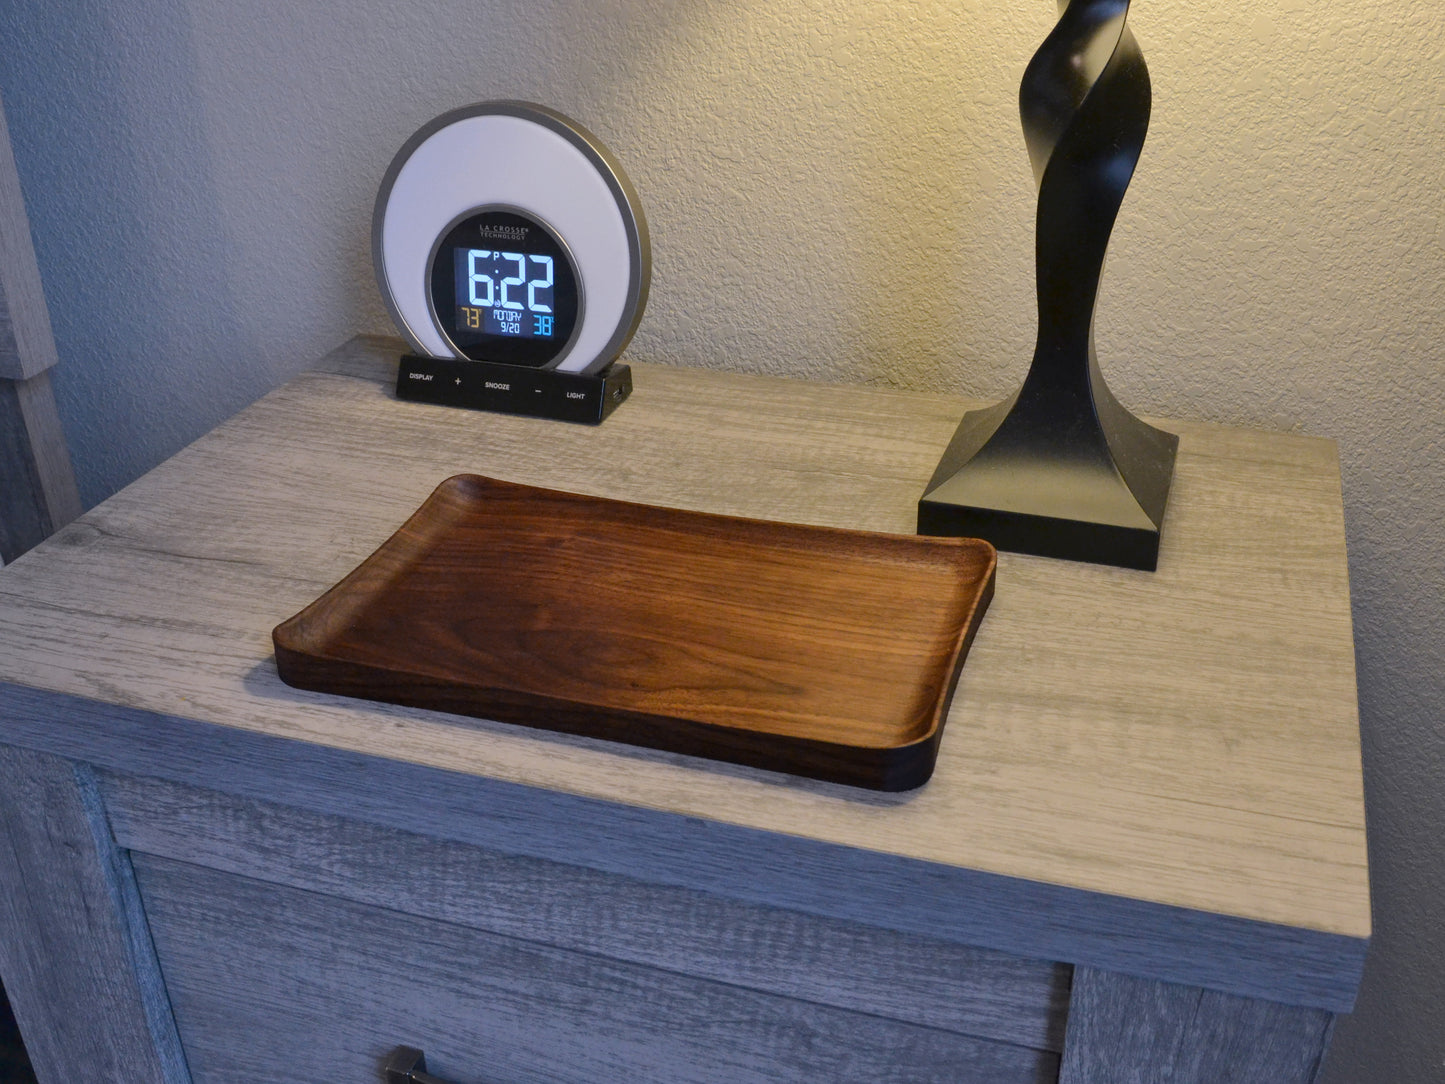 nightstand tray for wallet, phone, keys, catchall tray